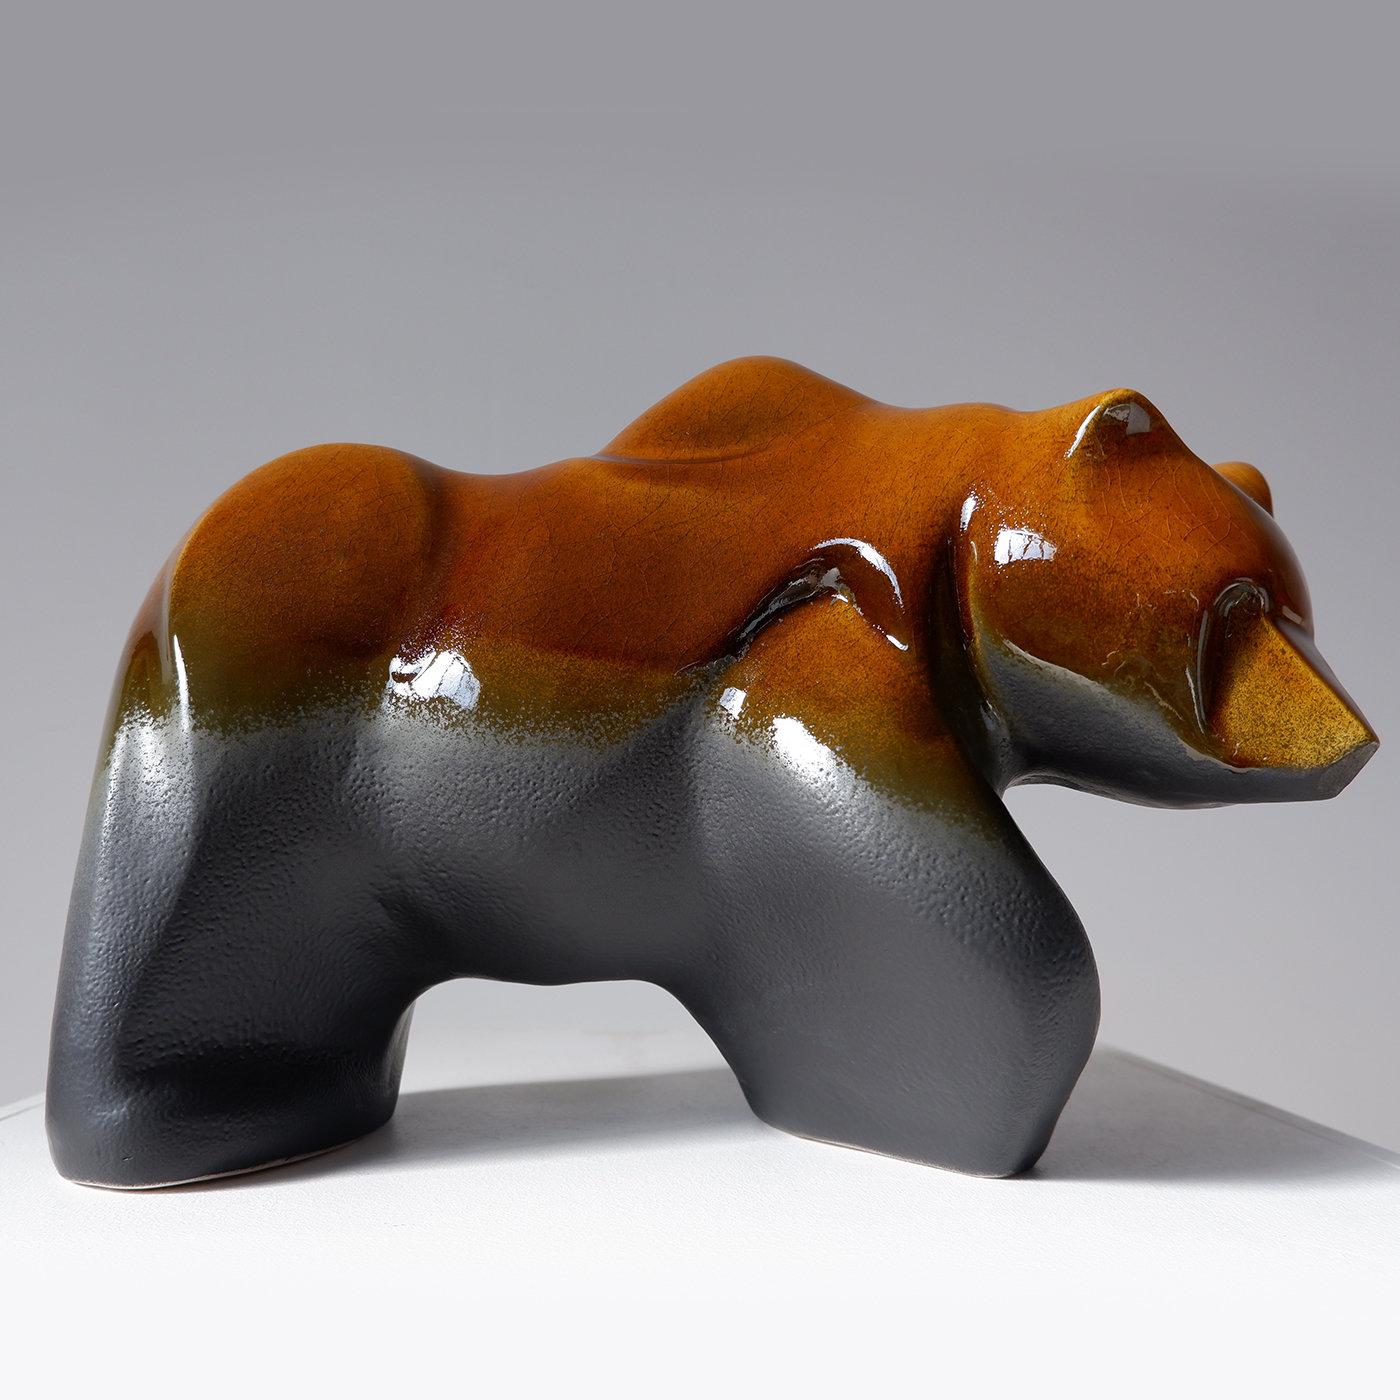 When paired with the brand's Bull statue, this item represents the highs and lows of the New York Stock Exchange. Made from polychrome ceramics, its surface is in a glossy brown and black gradient, which accentuates the animal's dynamic movement,